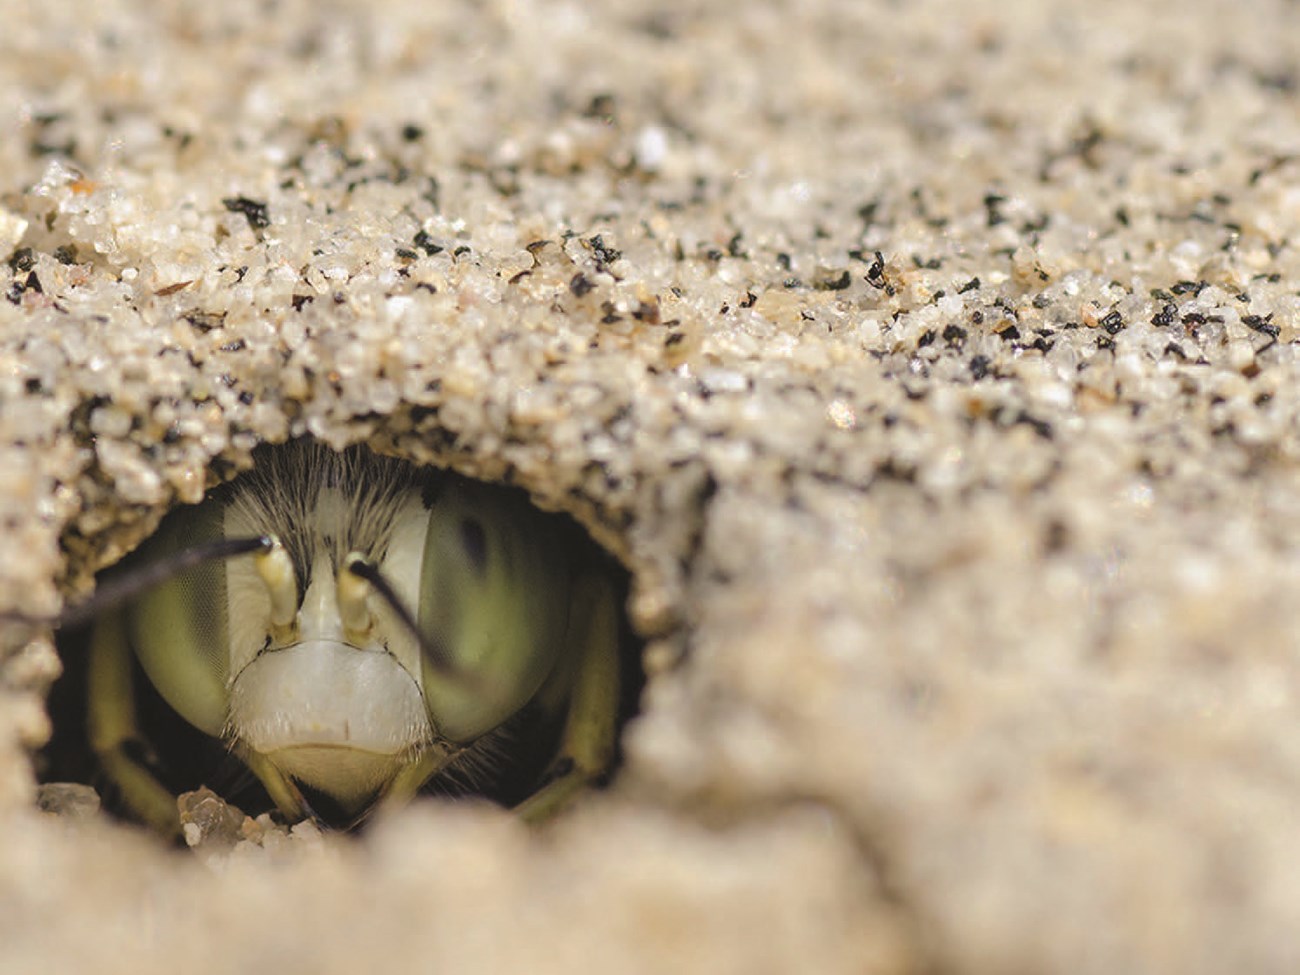 Extreme close-up of a bee's face just within a tunnel in the sand.